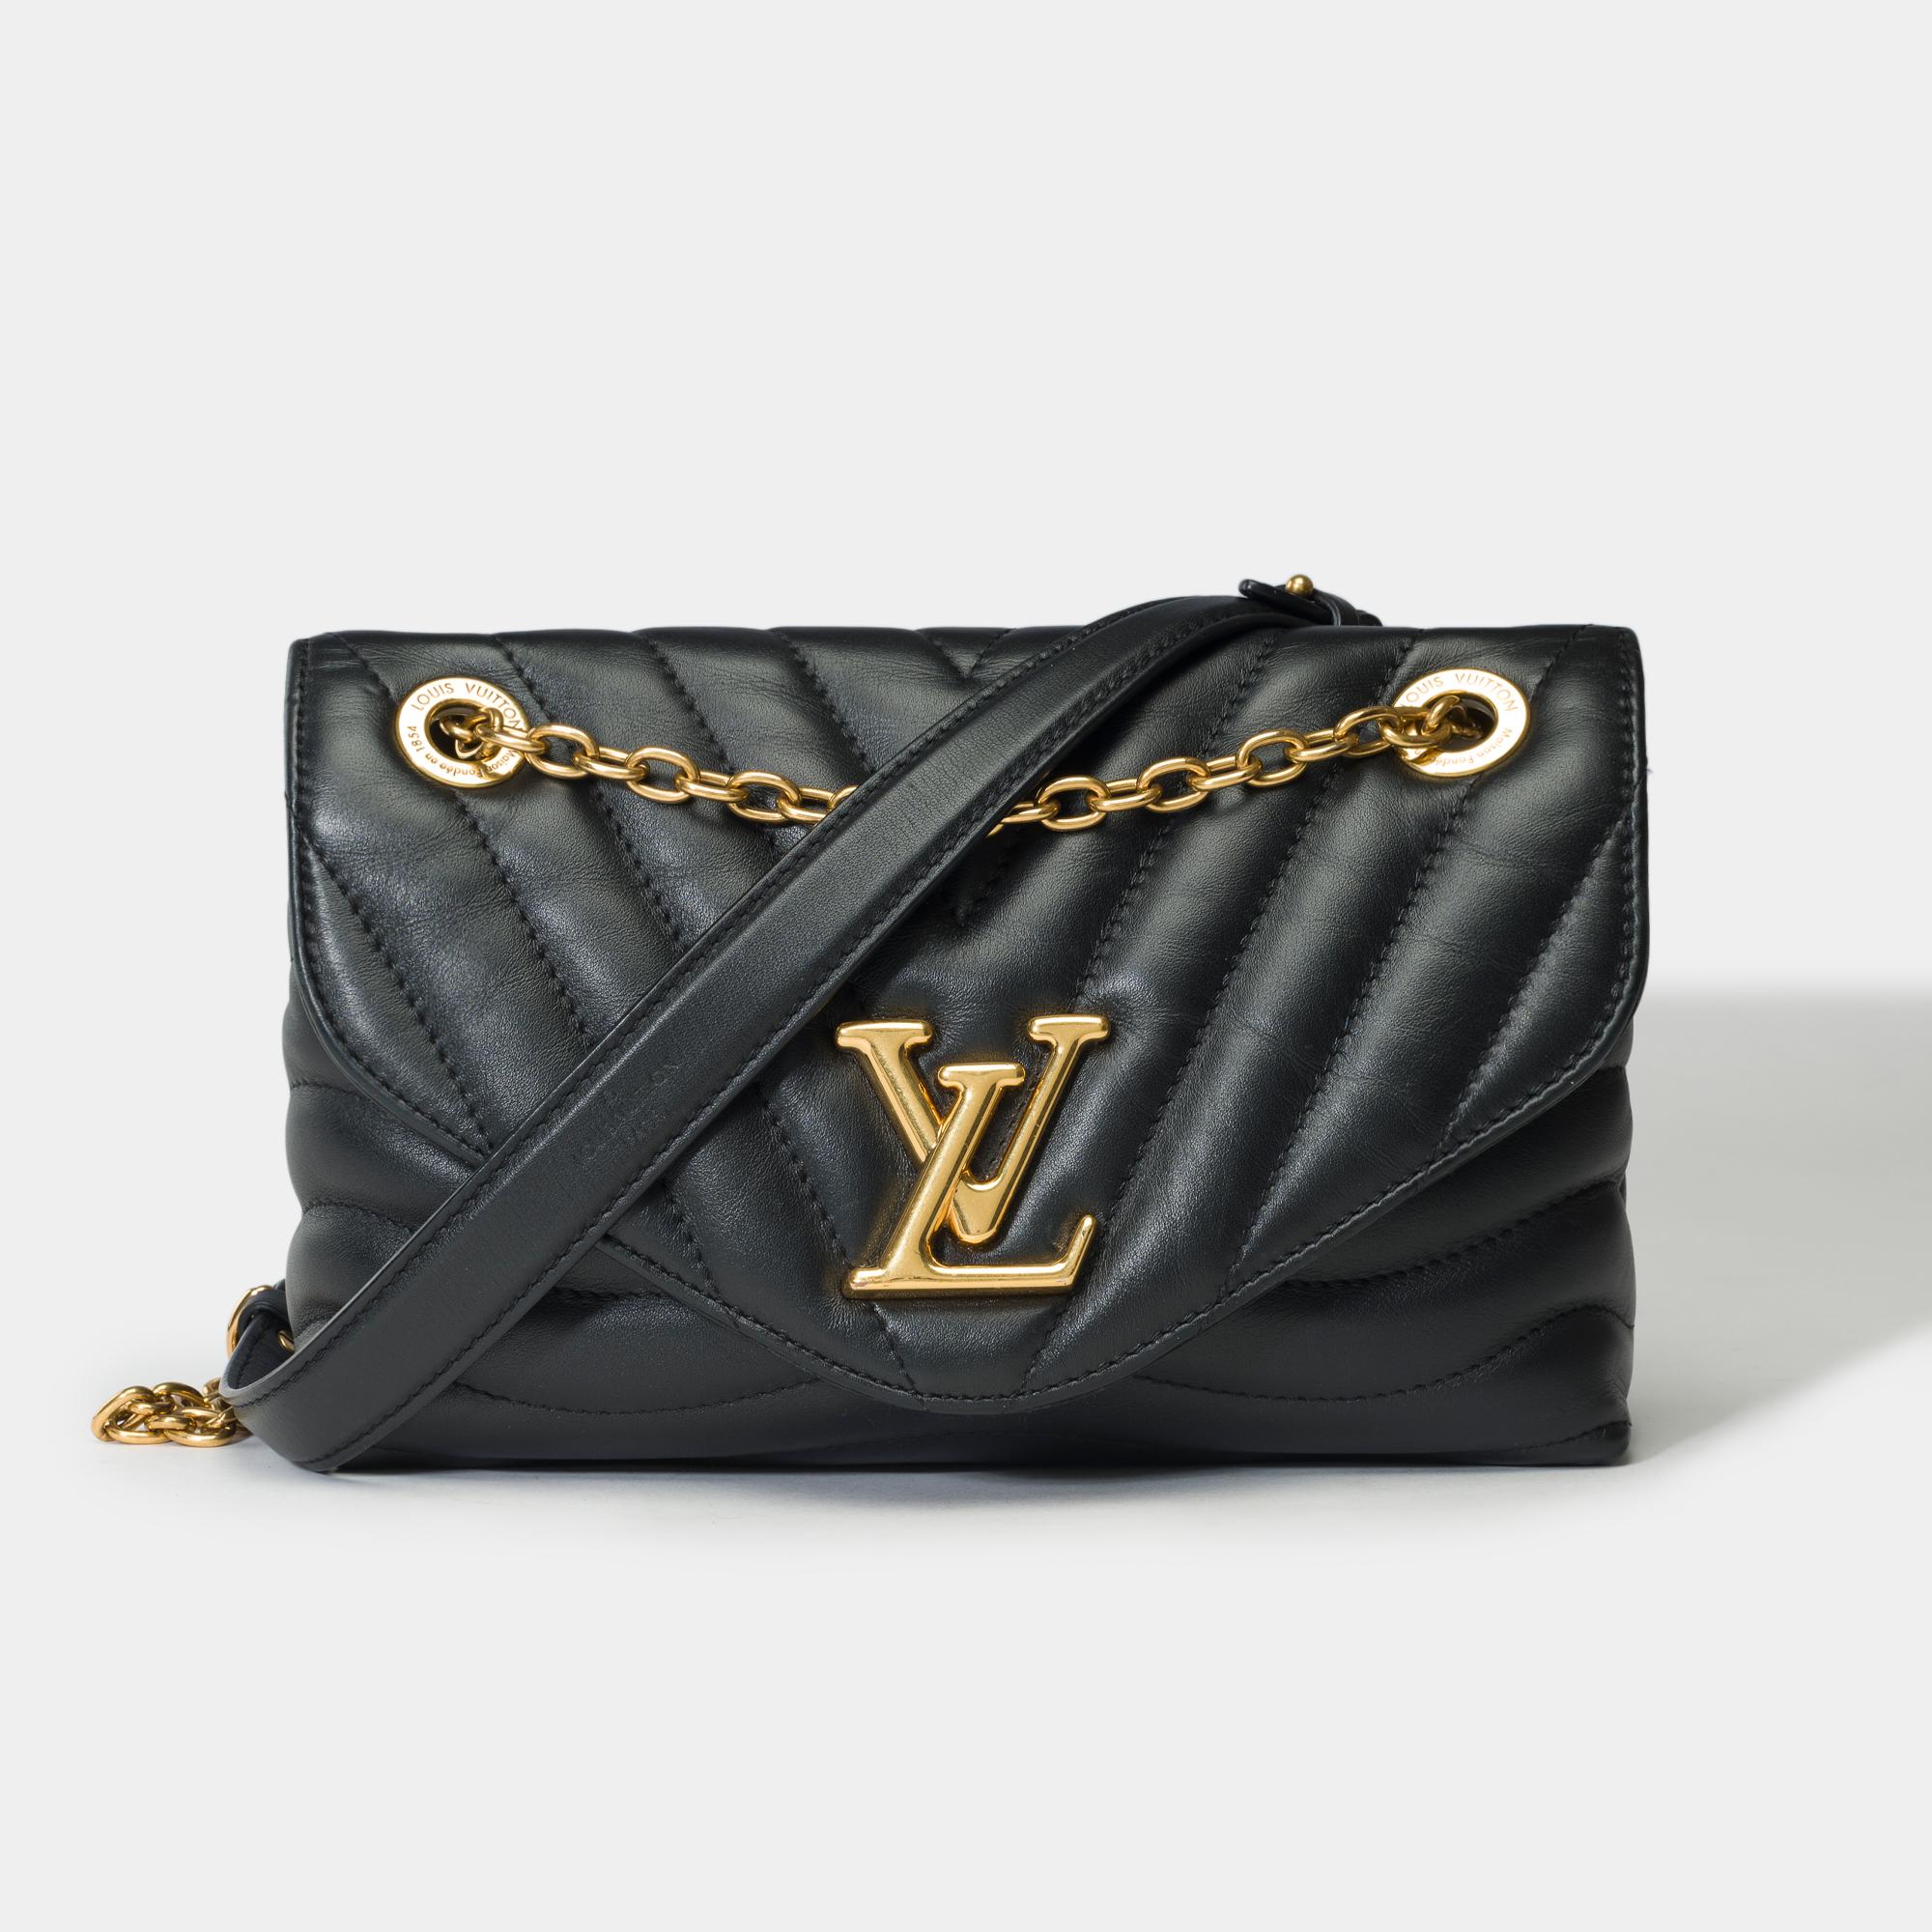 Crafted​ ​from​ ​soft,​ ​padded​ ​calf​ ​leather,​ ​this​ ​New​ ​Wave​ ​chain​ ​bag​ ​comes​ ​in​ ​black.​ ​The​ ​aged​ ​gold​ ​finish​ ​of​ ​the​ ​iconic​ ​LV​ ​lock​ ​and​ ​metal​ ​parts​ ​lend​ ​this​ ​model​ ​a​ ​retro​ ​look.​ ​Thanks​ ​to​